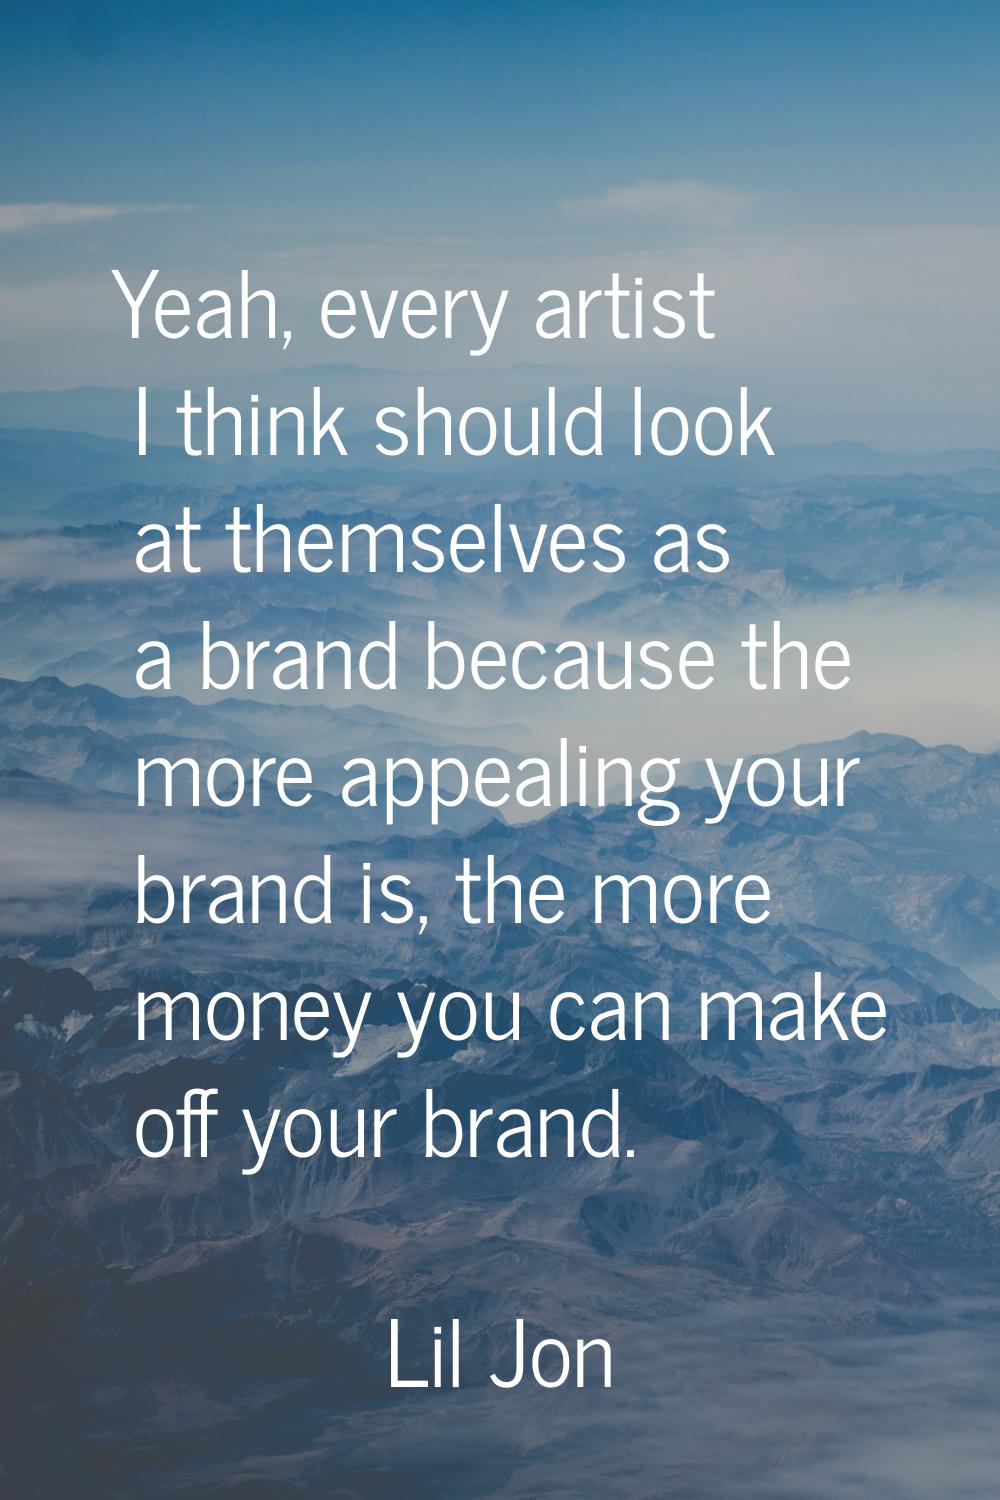 Yeah, every artist I think should look at themselves as a brand because the more appealing your bra